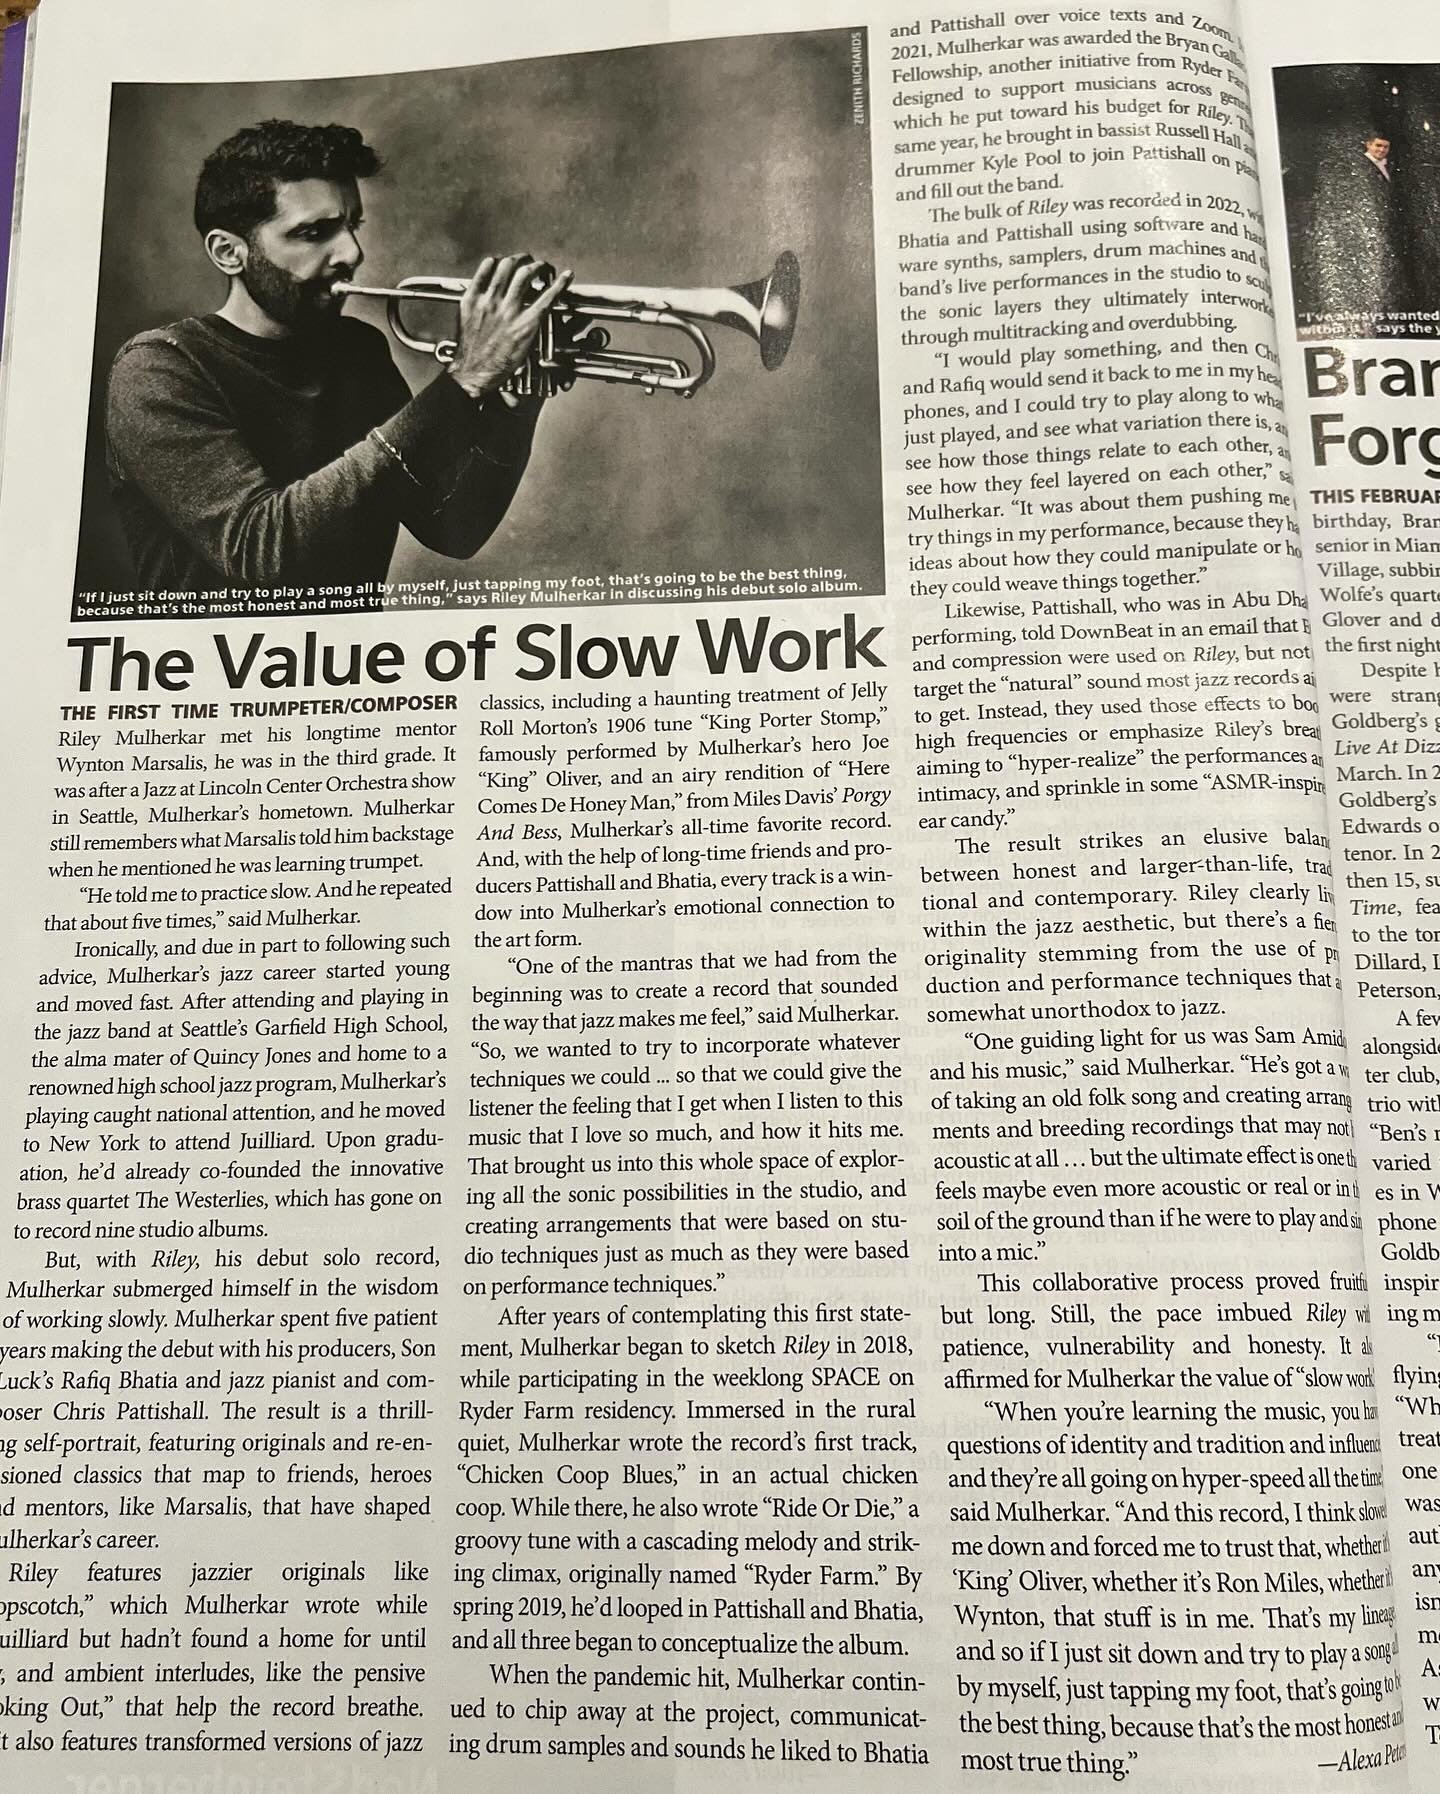 I&rsquo;m so grateful to @alexapeterswrites and @downbeat_mag for telling the story of my debut album in the May issue of DownBeat. I grew up reading every issue of DownBeat cover to cover, so it&rsquo;s a real trip to open the magazine and see a who